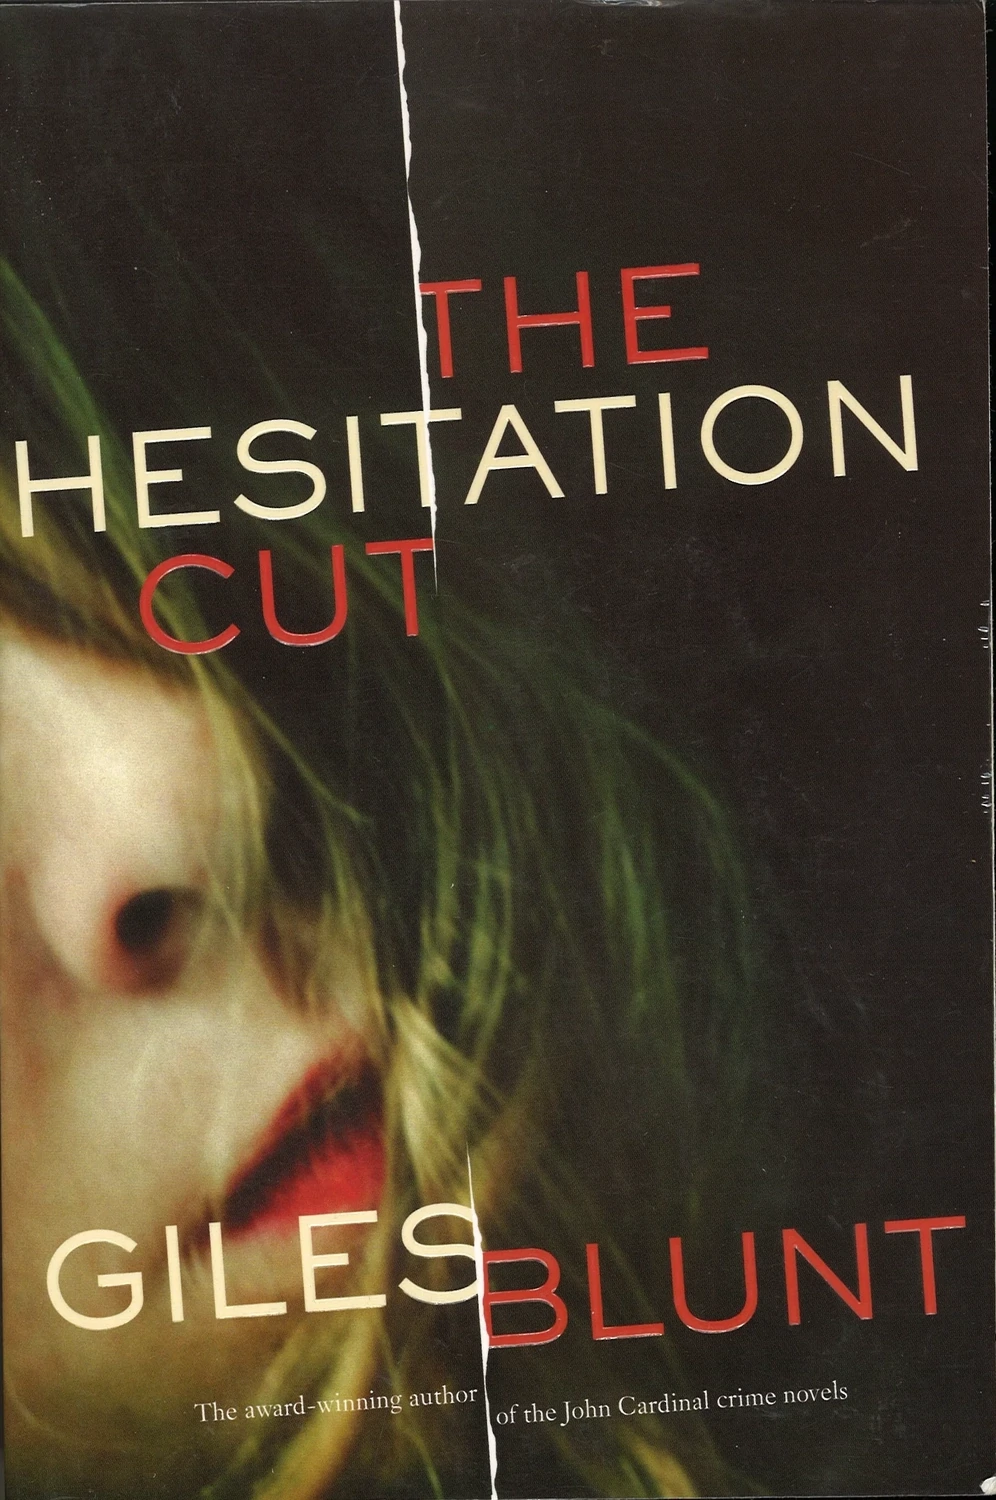 The Hesitation Cut by Giles Blunt